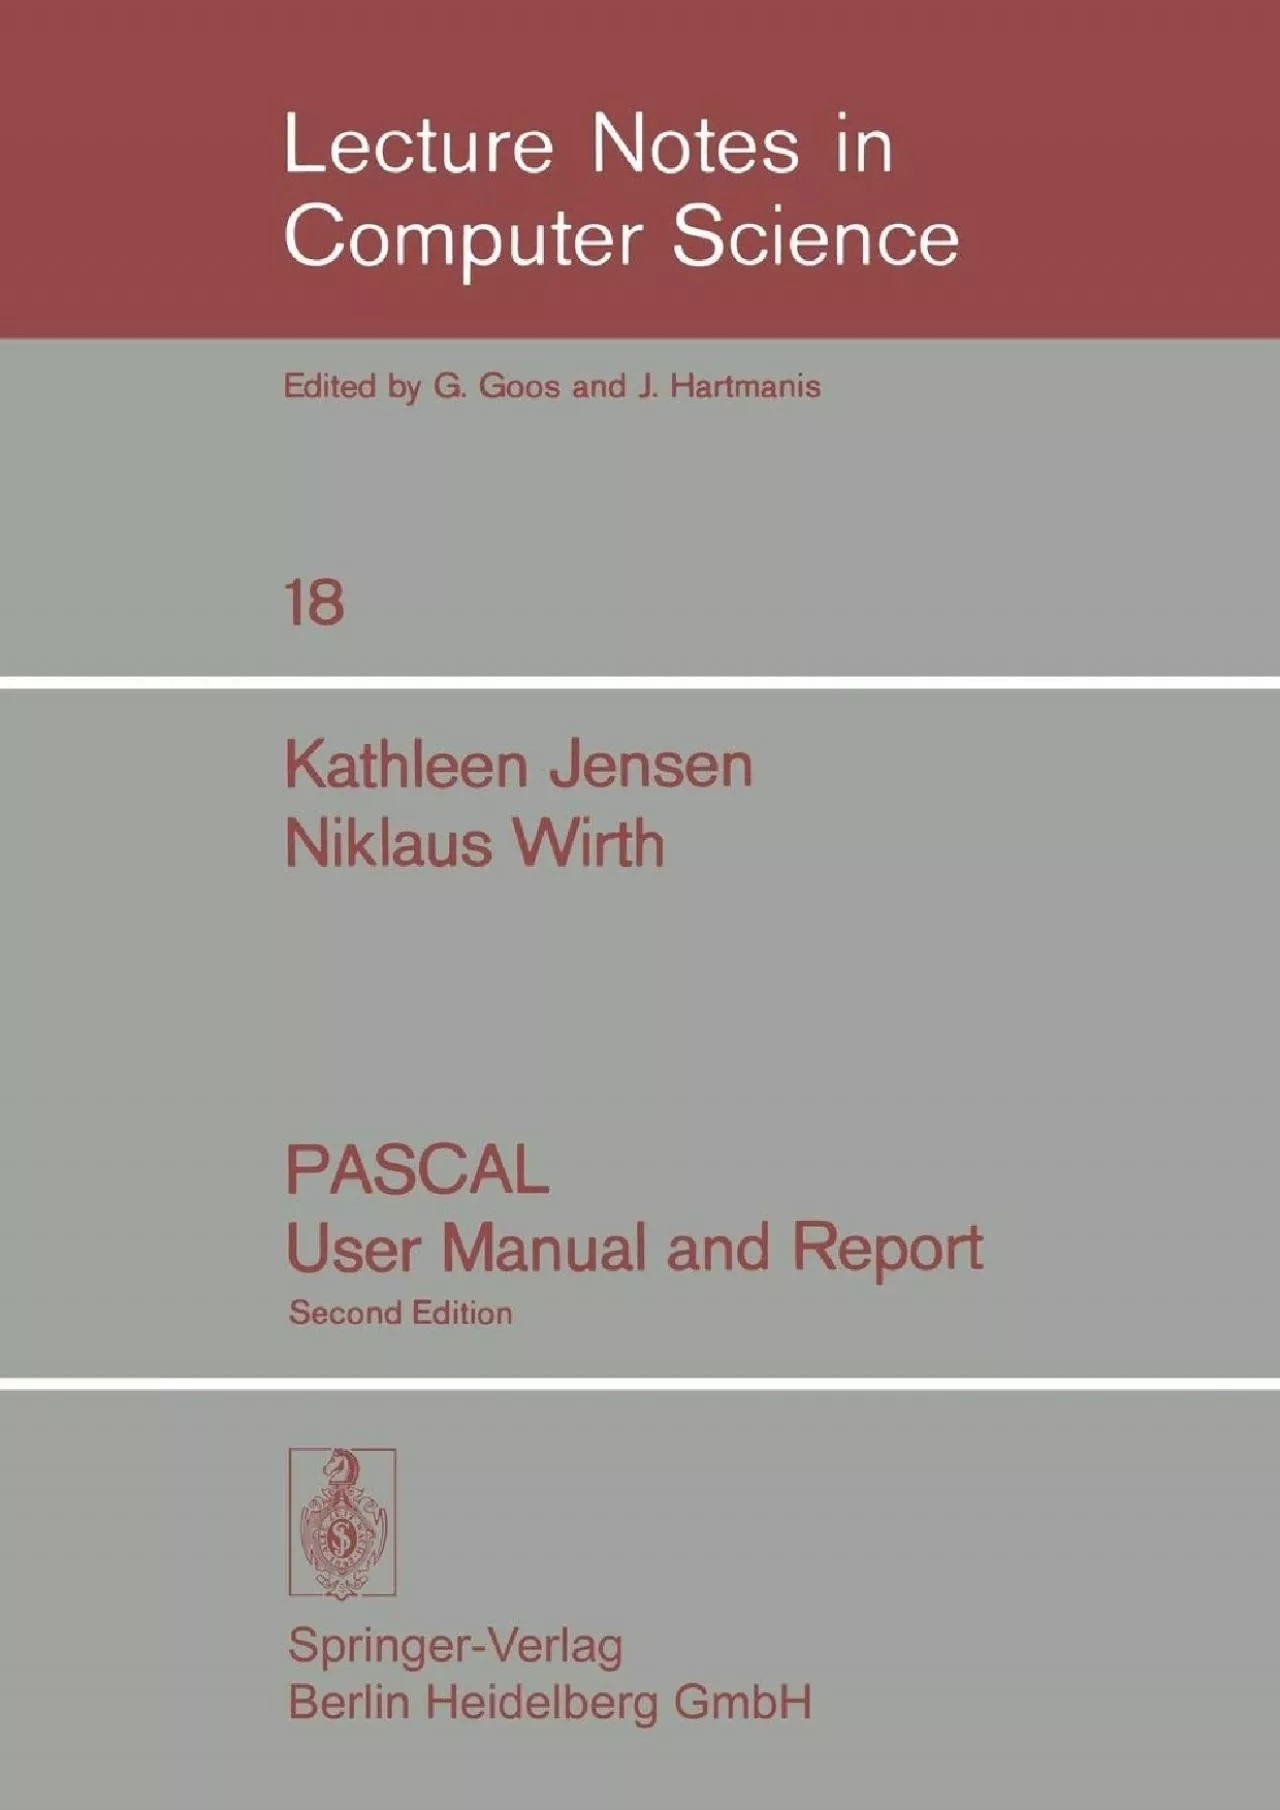 [BEST]-PASCAL User Manual and Report (Lecture Notes in Computer Science, 18)